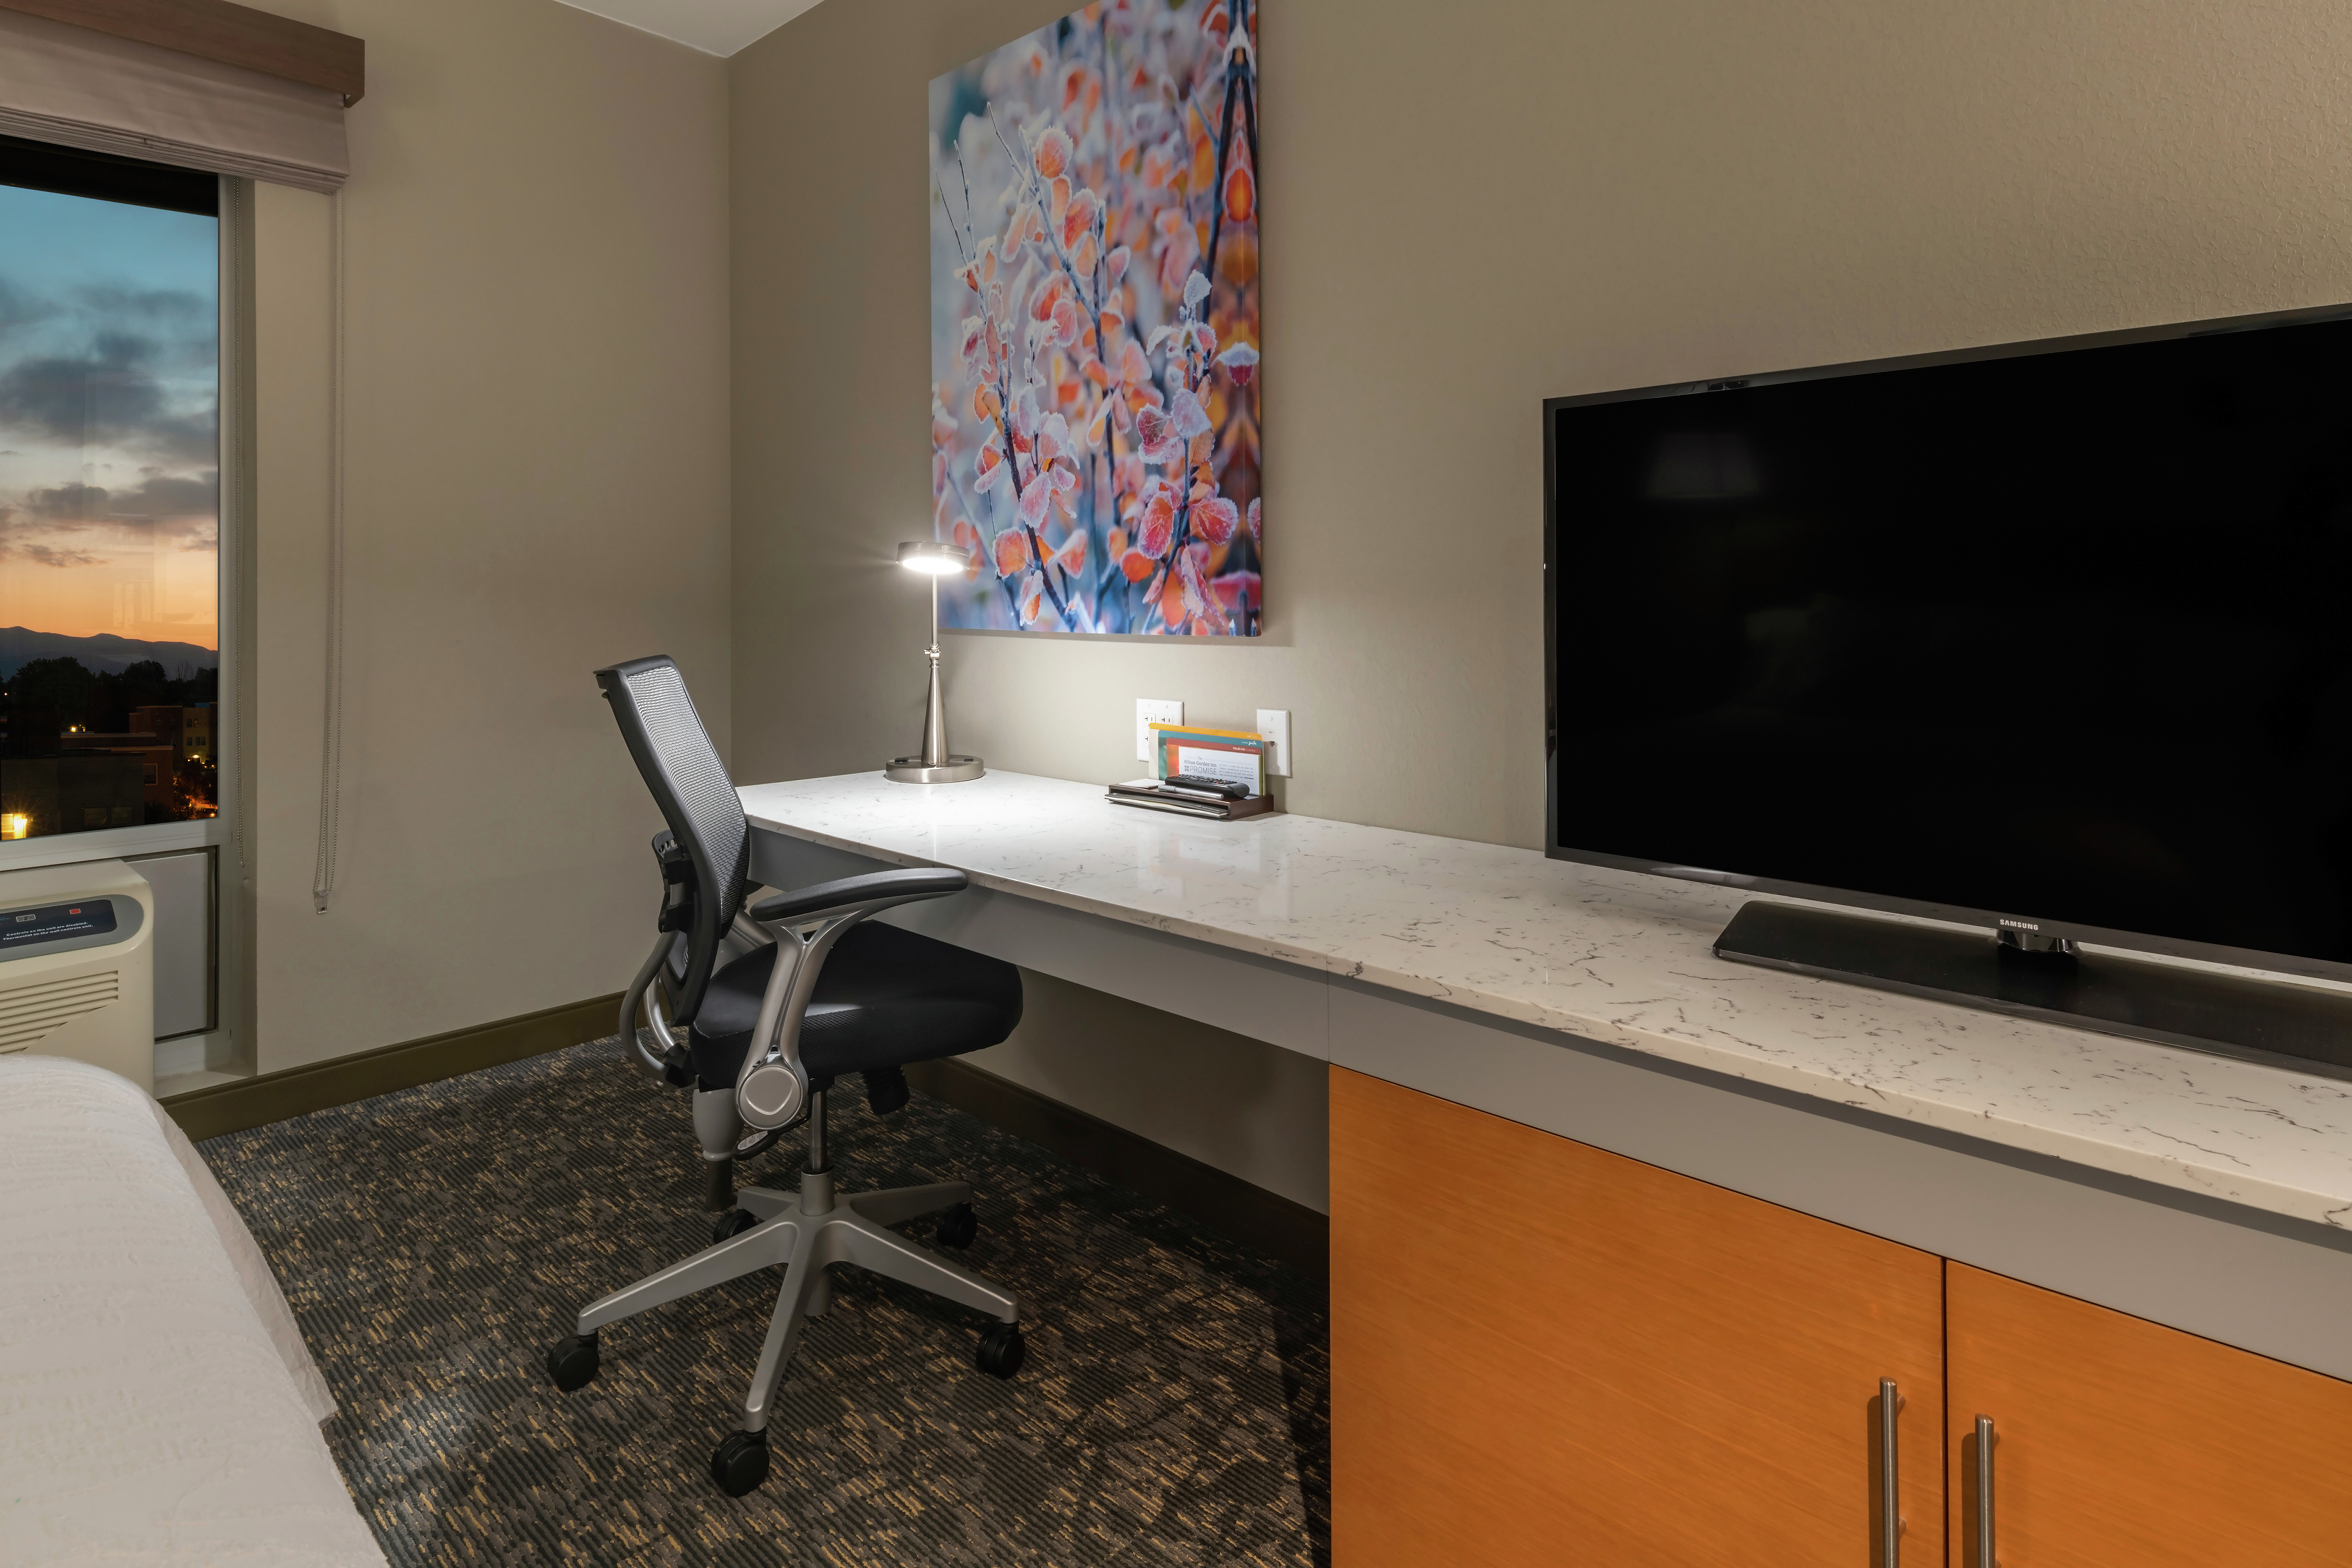 Guestroom Desk Area with Room Technology